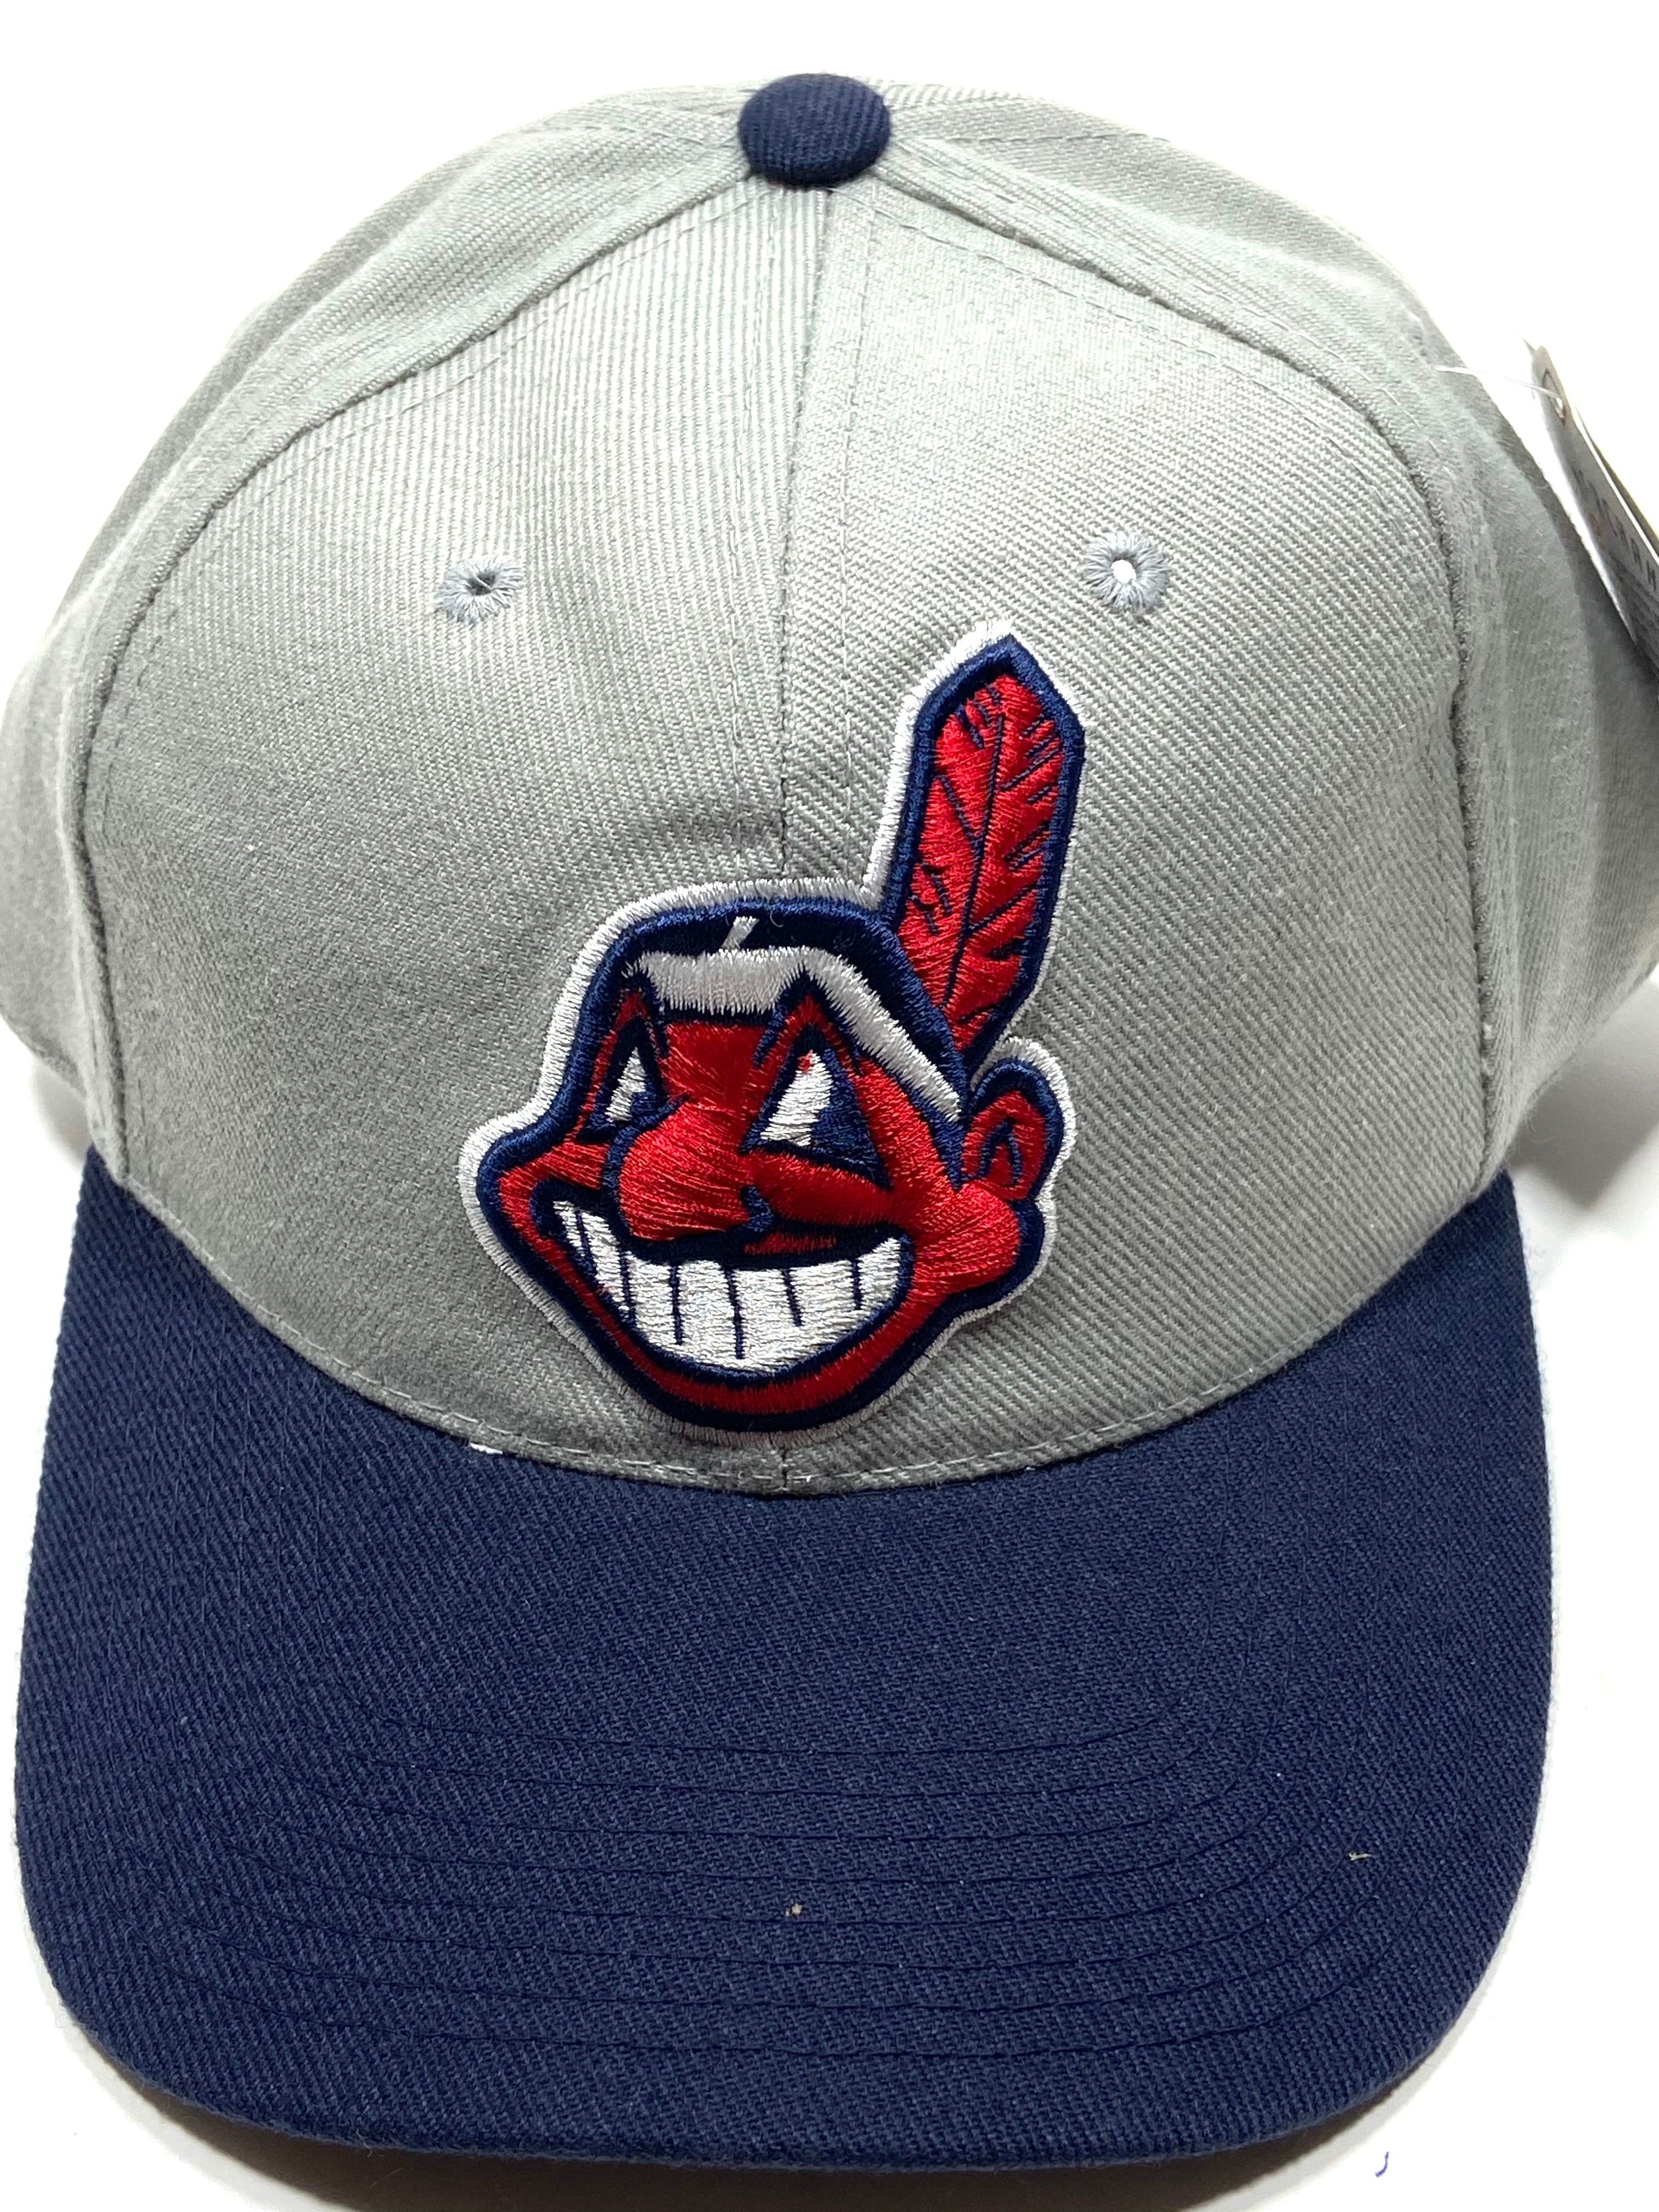 Cleveland Indians Vintage MLB Gray 20% Wool Cap by Sports